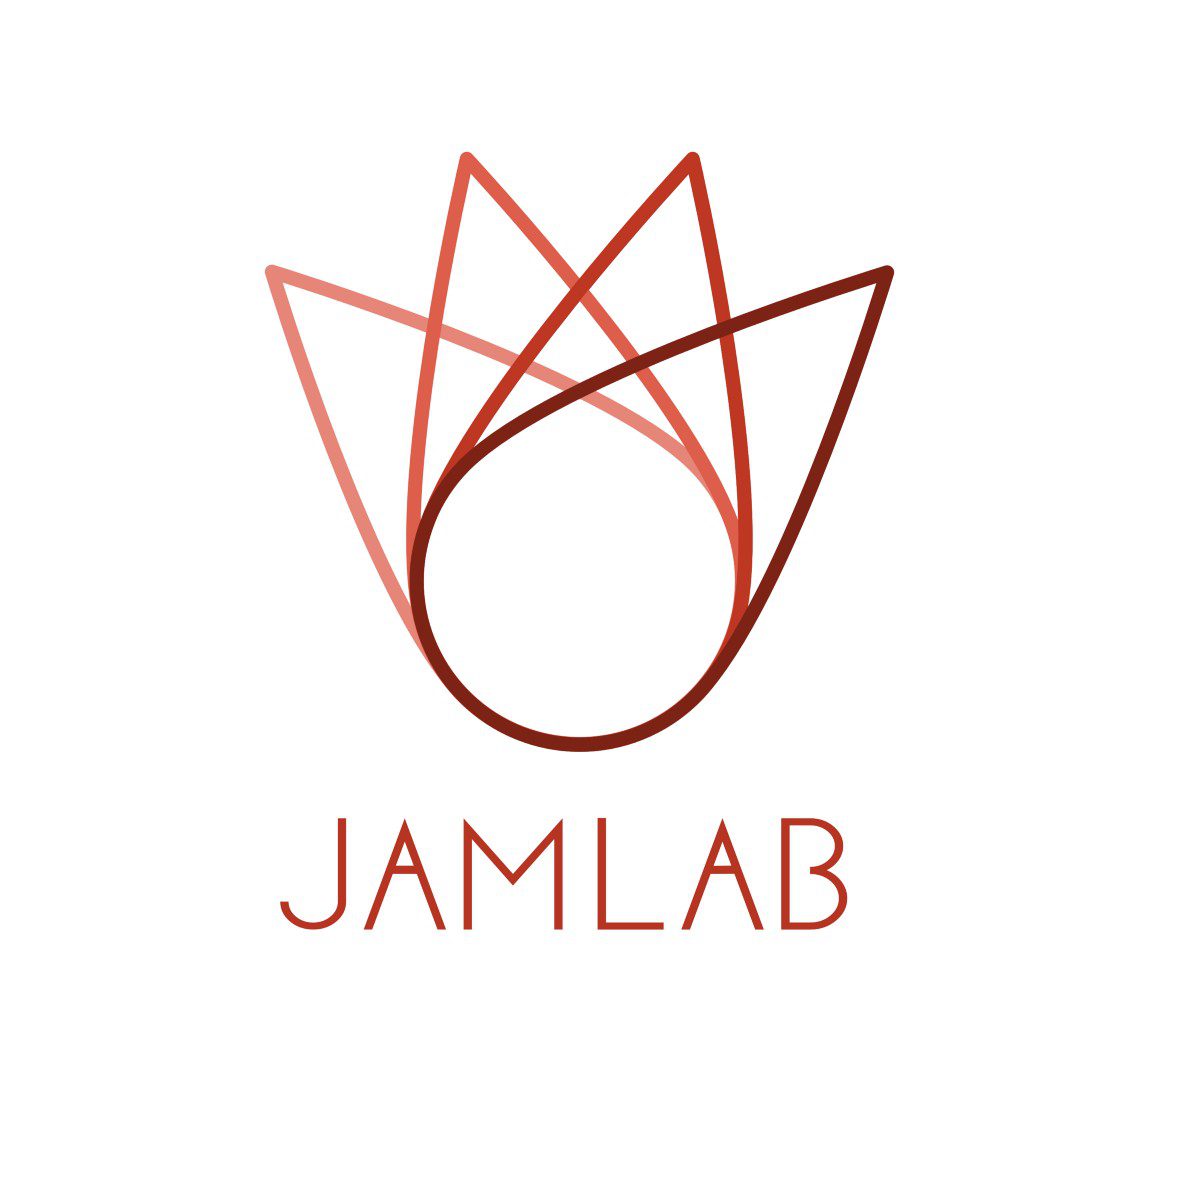 Jamlab Accelerator sub-Saharan Africa Programme 2023 for early-stage journalism and media start-ups